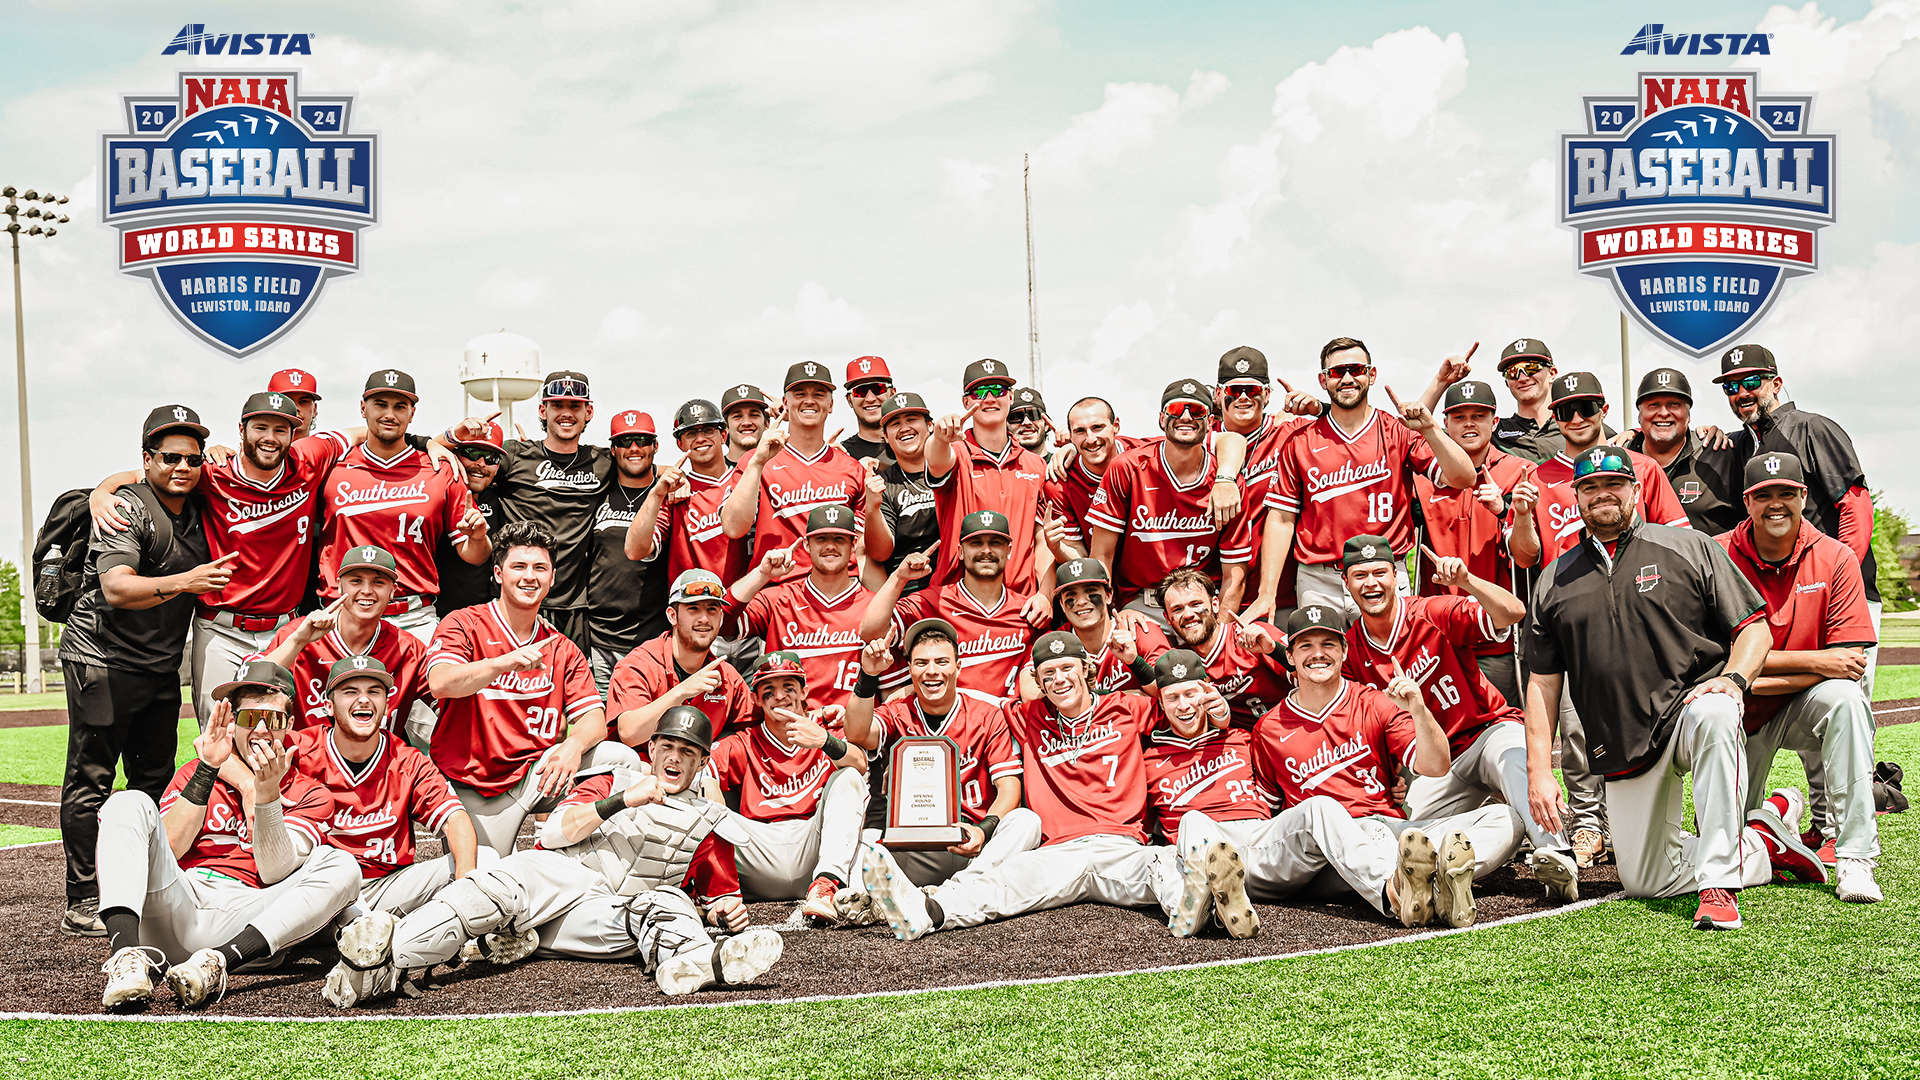 IU Southeast (Ind.) won the Upland Bracket to advance to their second Avista NAIA World Series in program history.